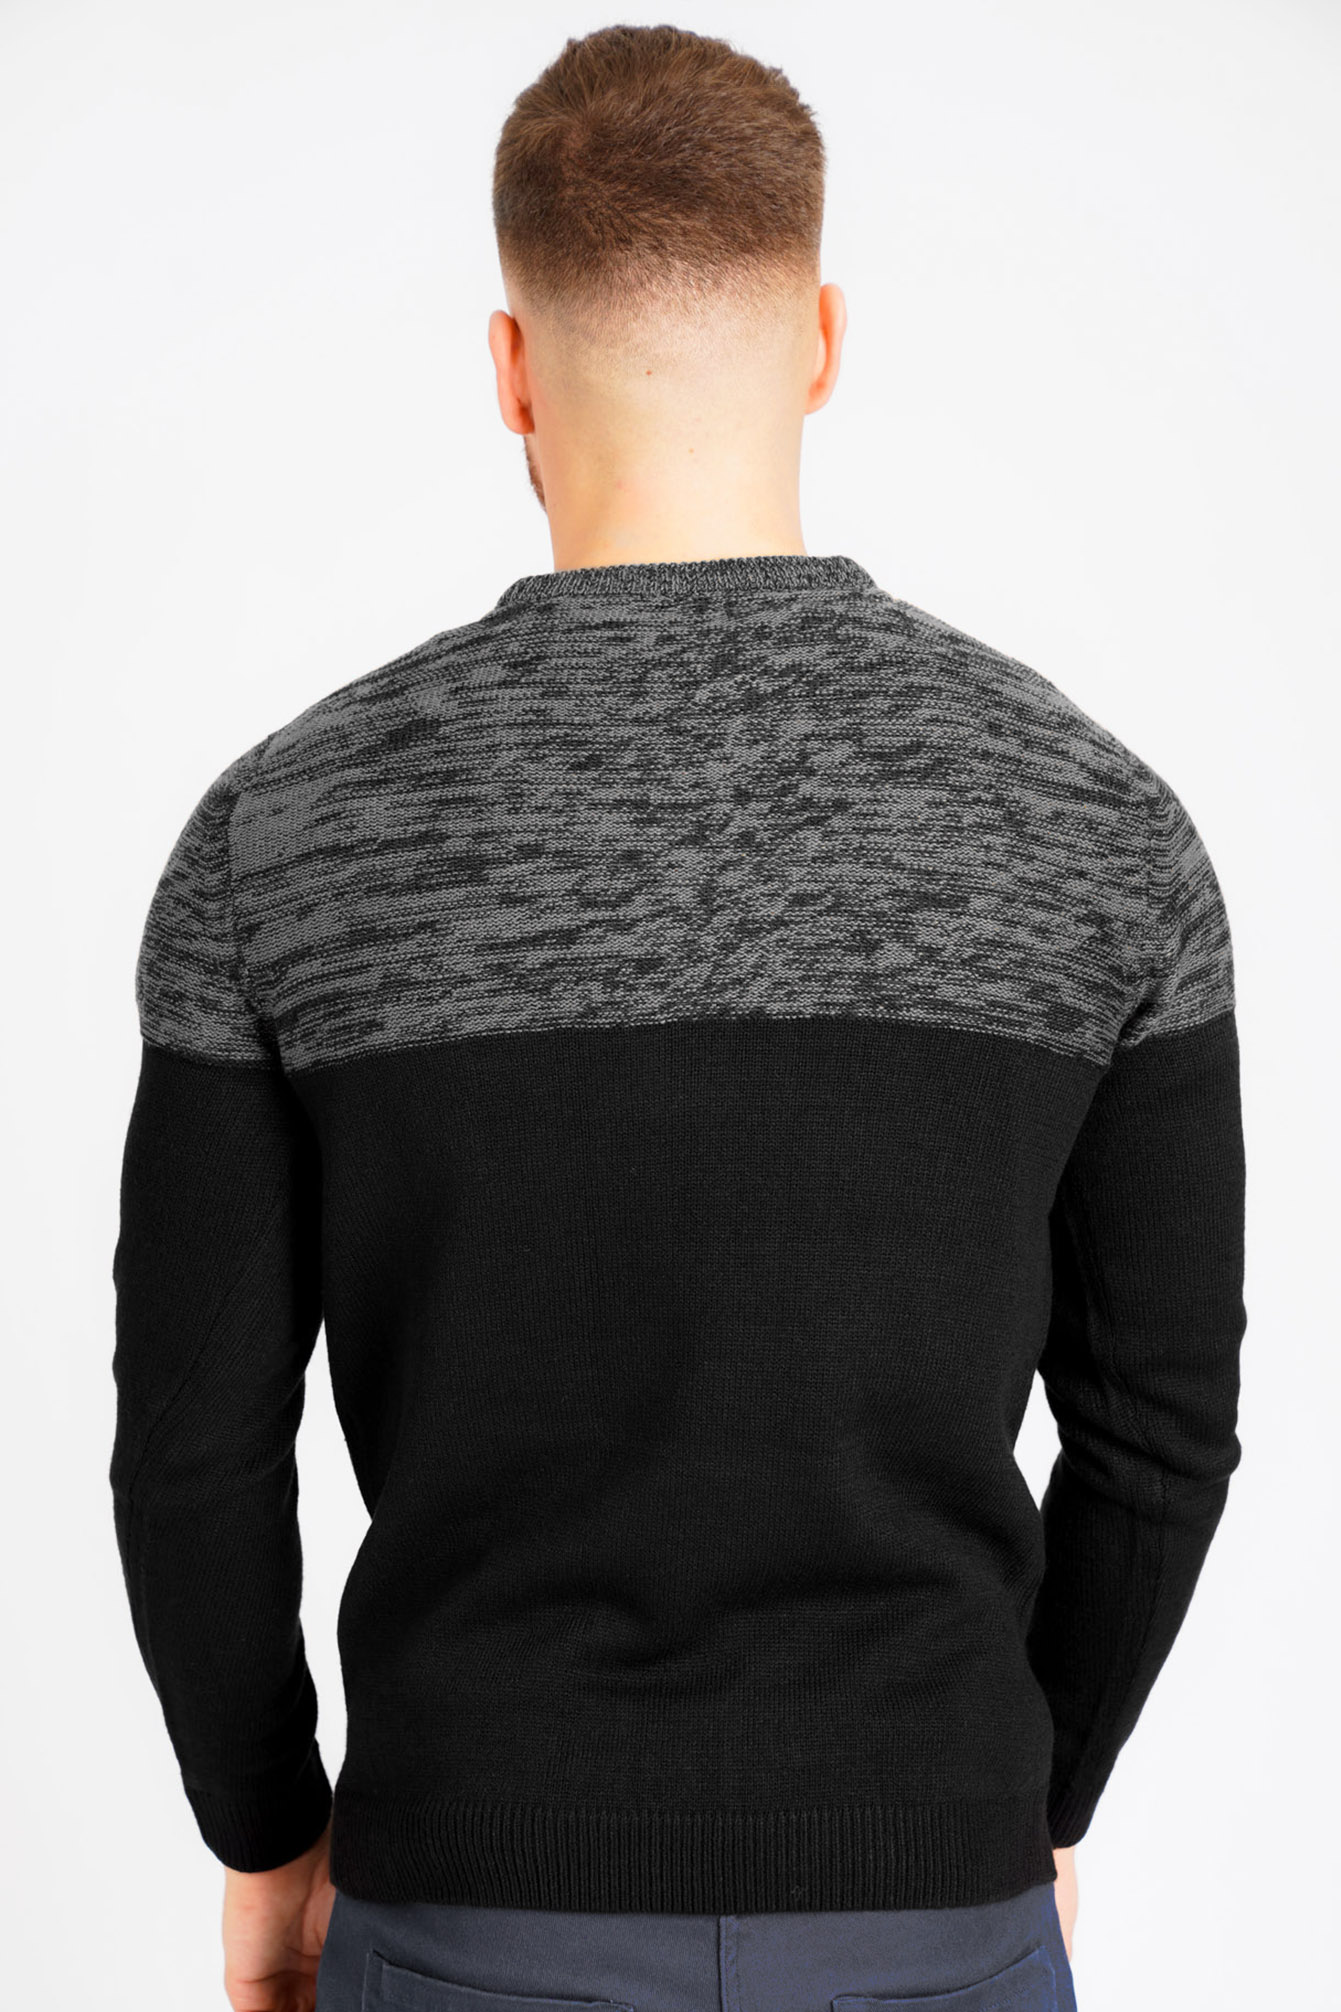 Tokyo Laundry & Kensington Crew Neck Jumpers & Cardigans Knit Pullover Sweater 